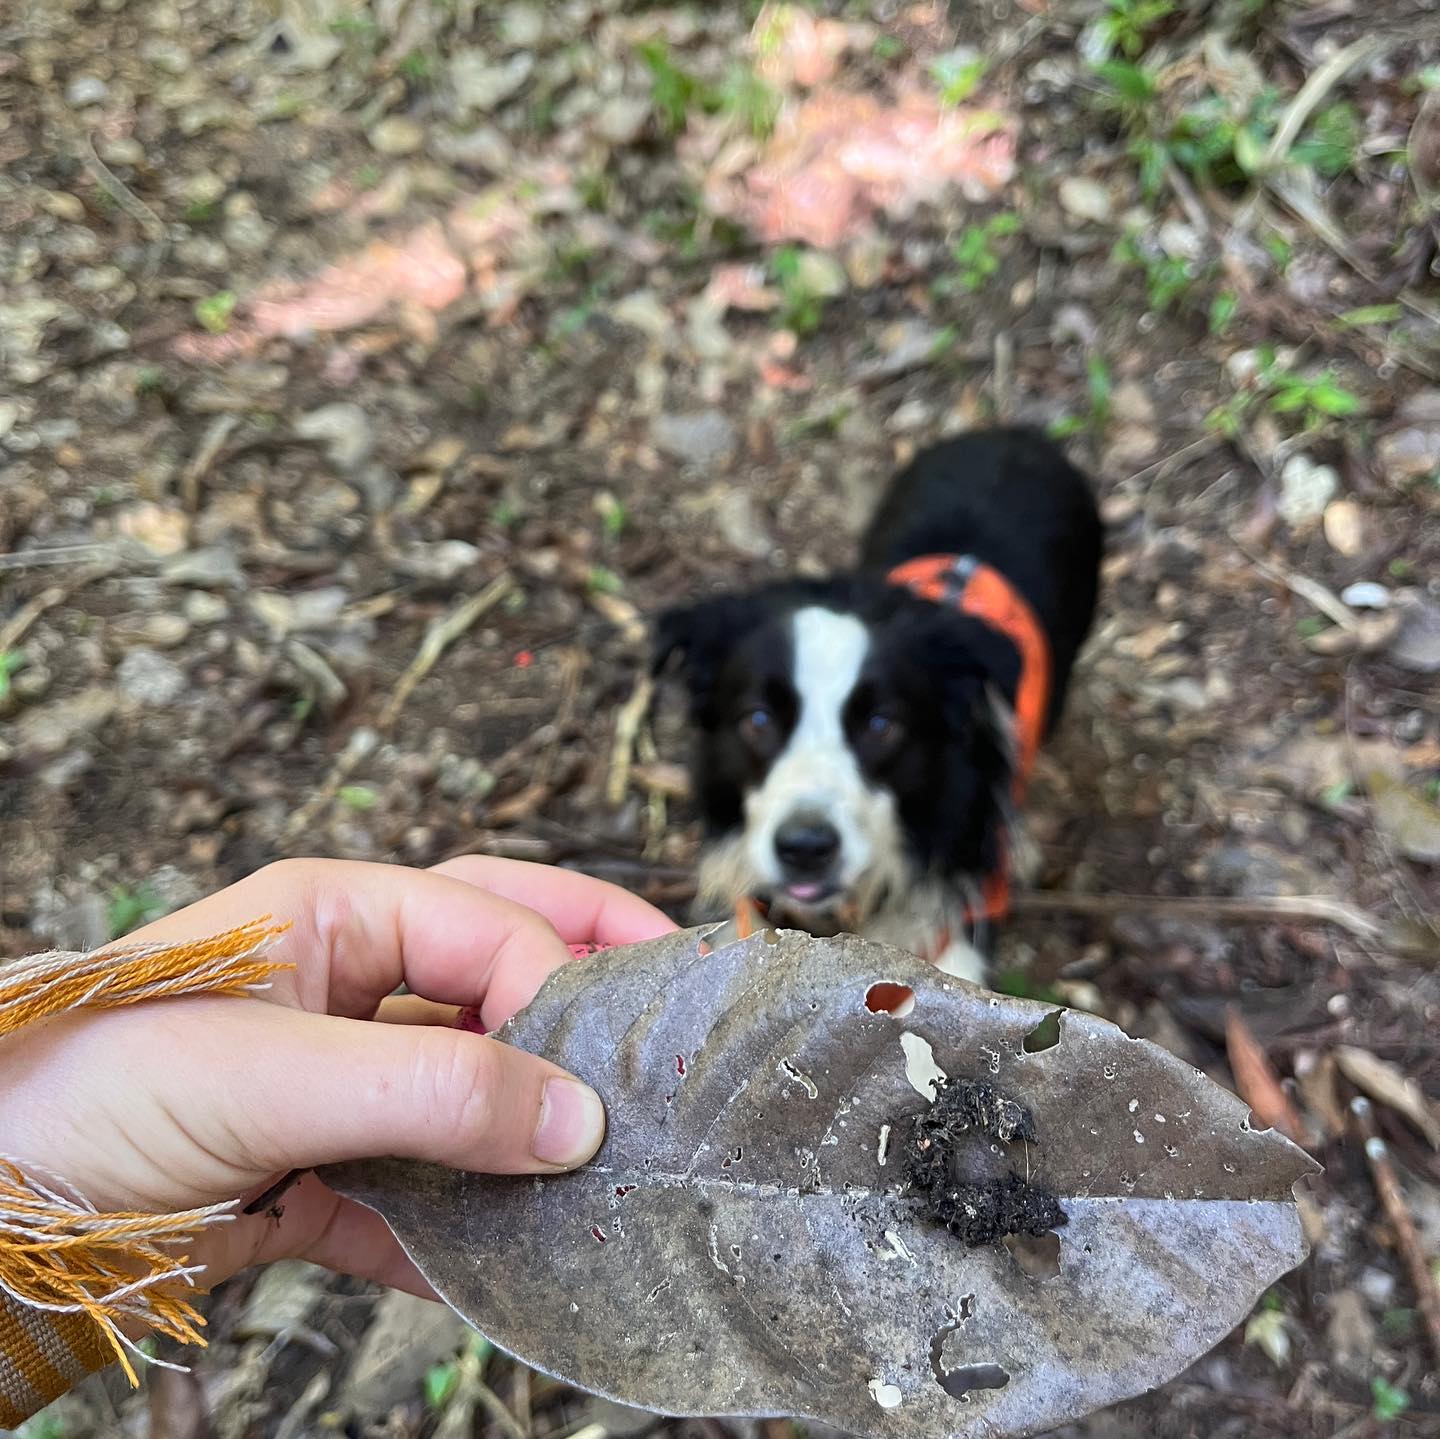 A leaf holding a scat sample can be seen in focus. Out of focus, a black and white dog can be seen.